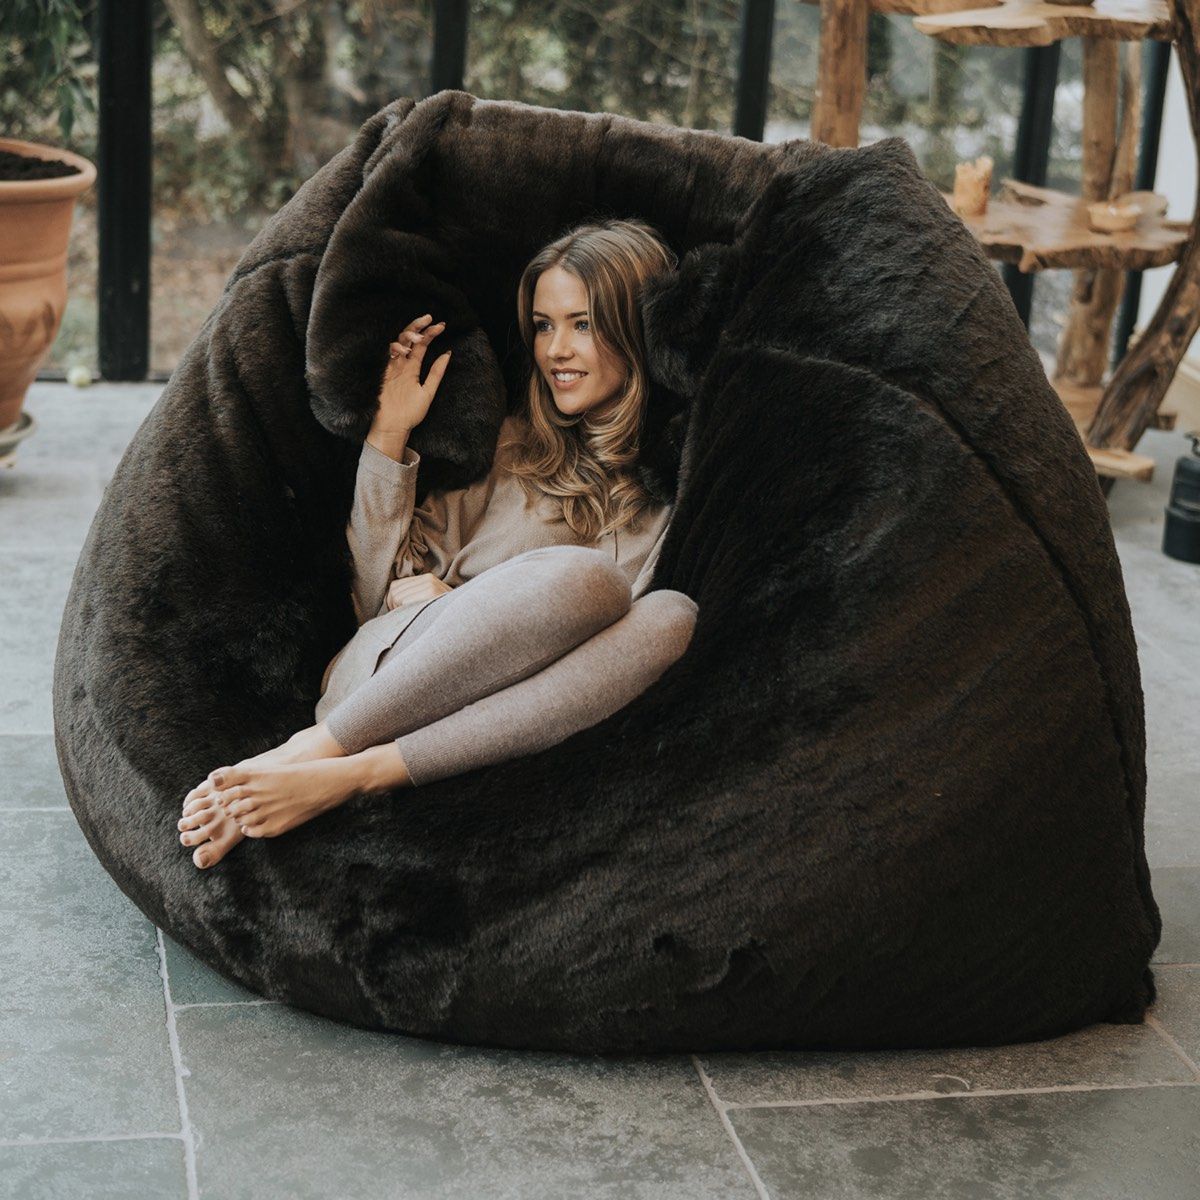 Faux fur slab bean bag with woman relaxing